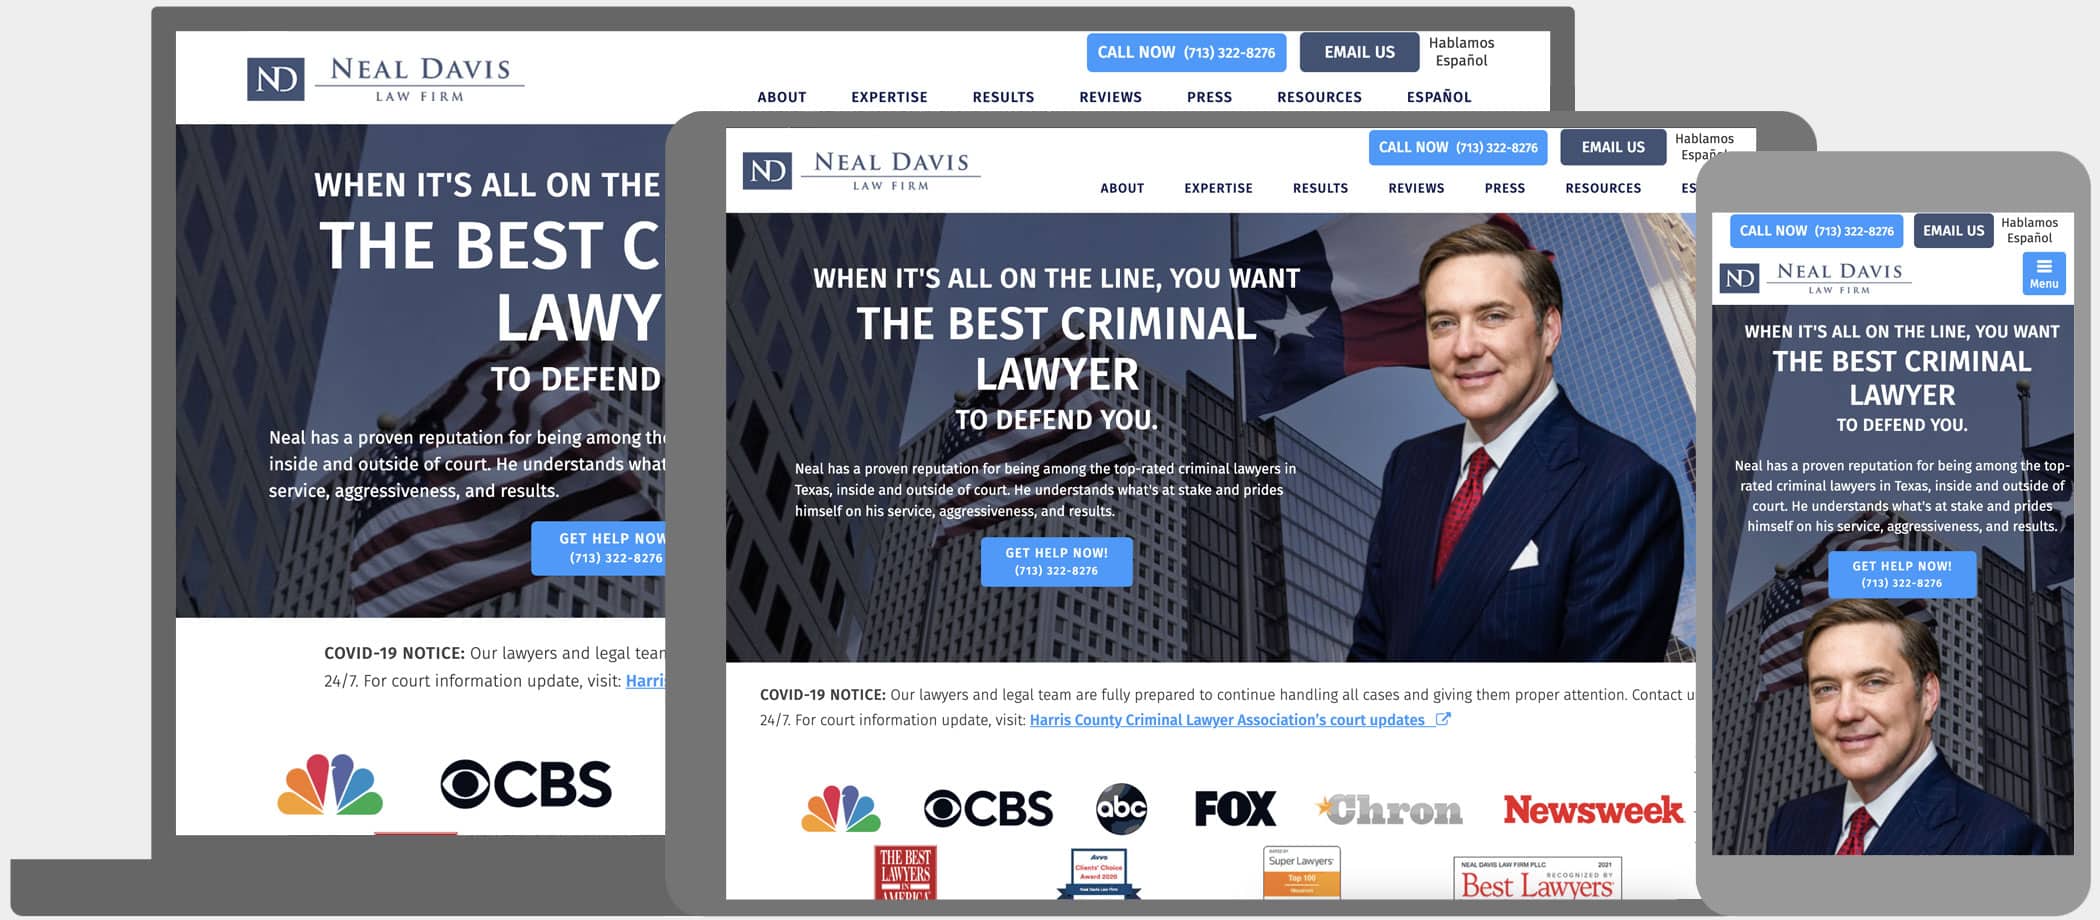 Neal Davis Law Firm: Professional web design and lead gen for Houston criminal defense attorney.